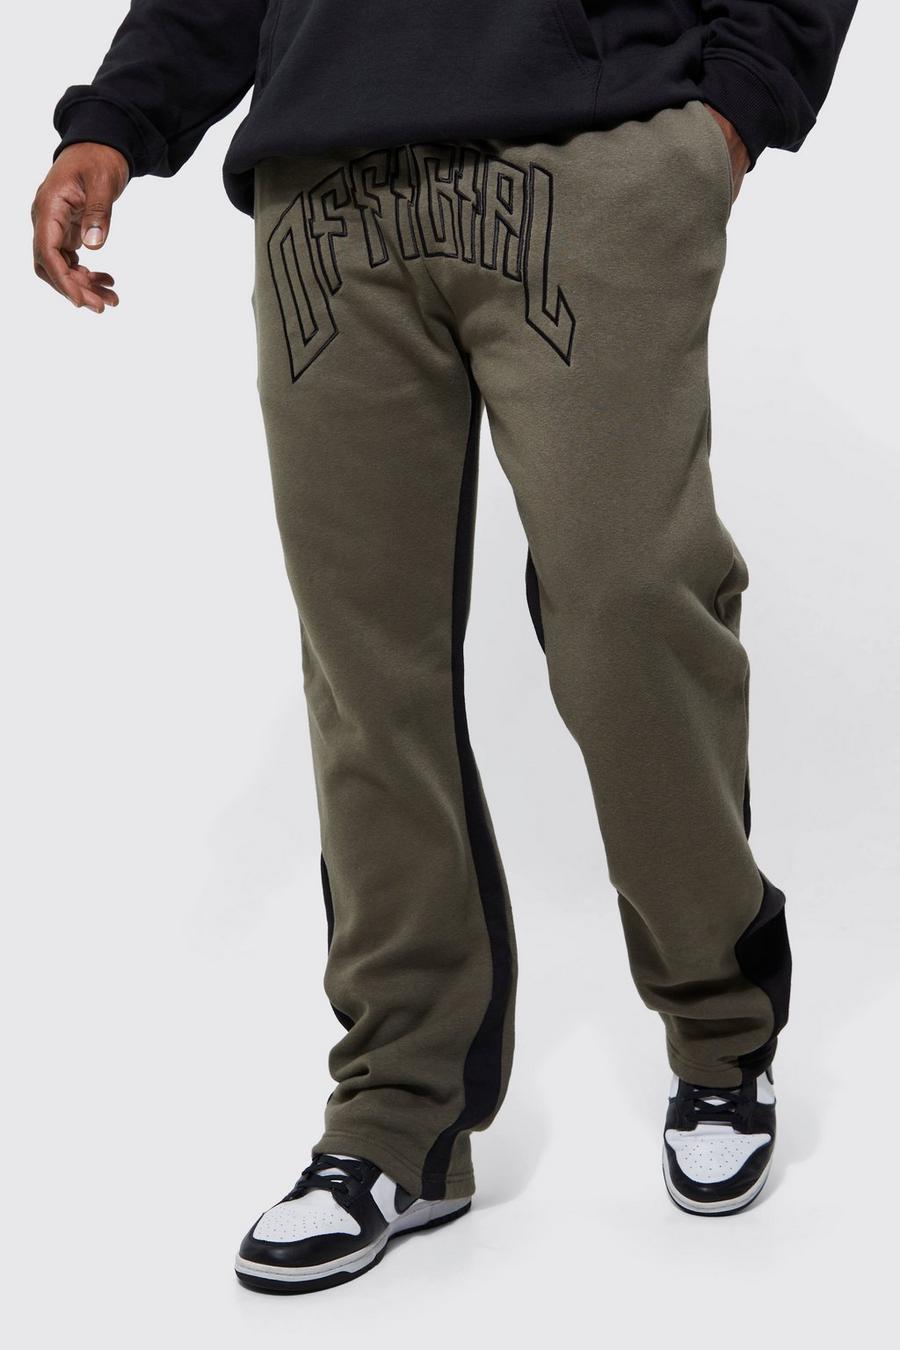 Olive green Plus Slim Stacked Official Gusset Jogger